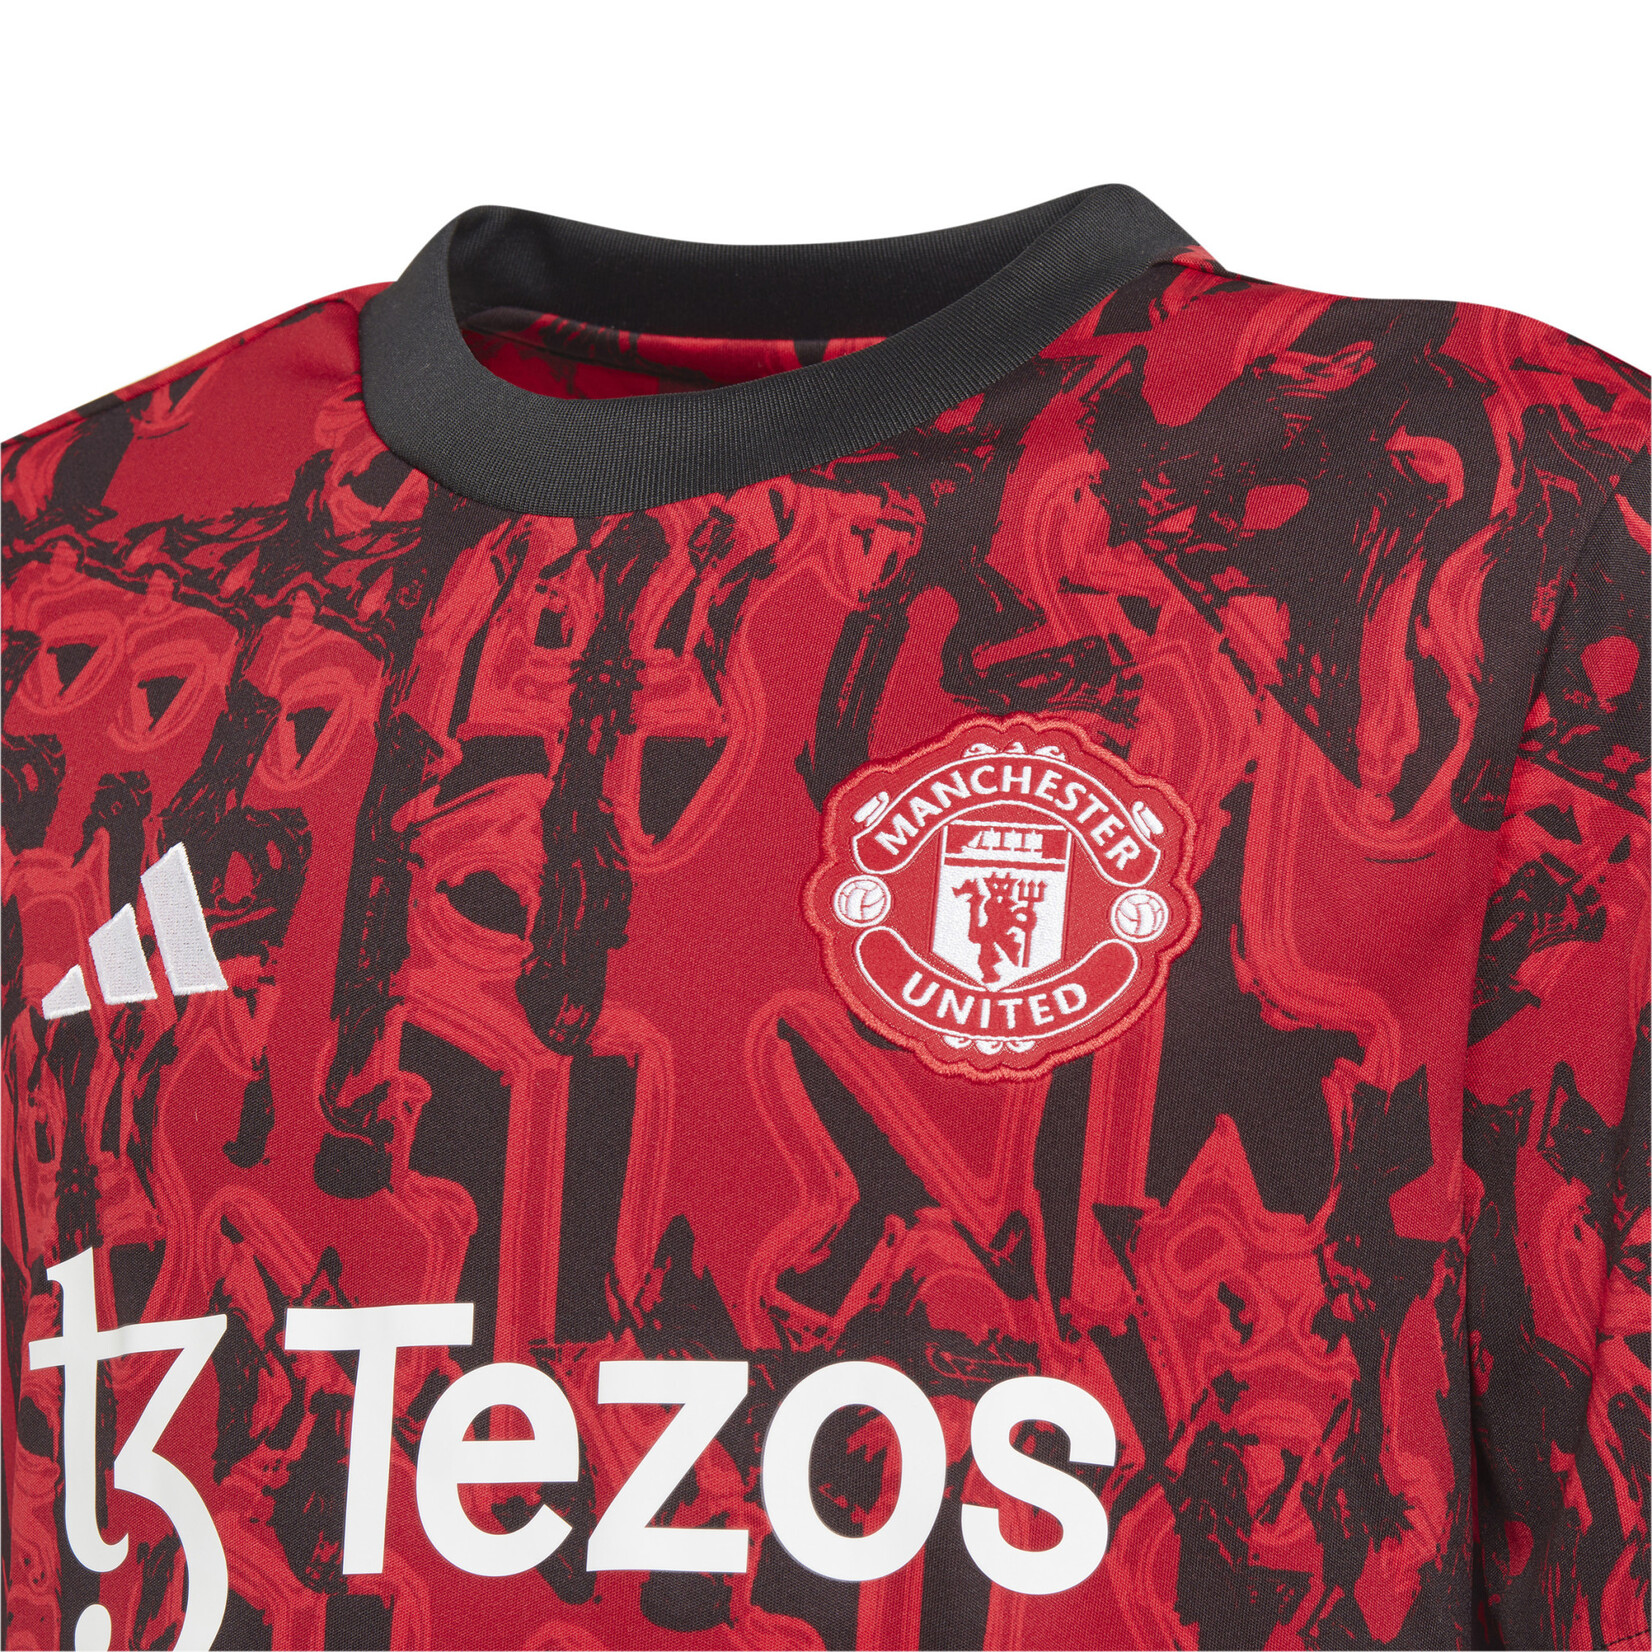 adidas Manchester United 23/24 Home Jersey - Red, Women's Soccer